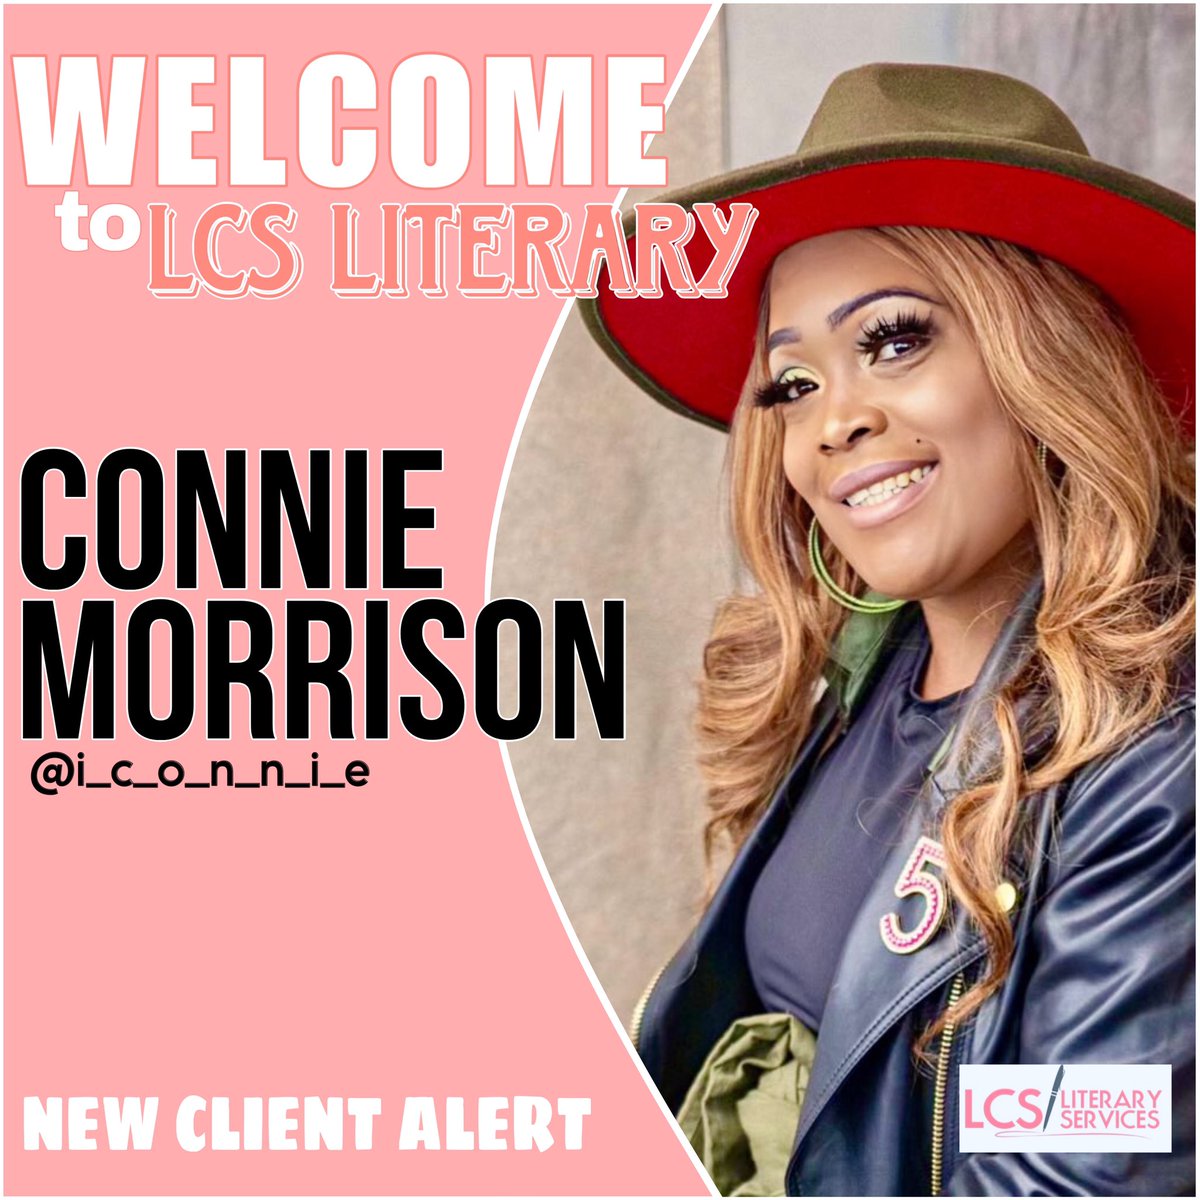 📣 LCS LIT NEWS: WELCOME Connie Morrison to the LCS Literary Agency! We are so thrilled to have you join us. 📖 Rep Kimberly L. Jones #authornews #booknews #author #Congratulations